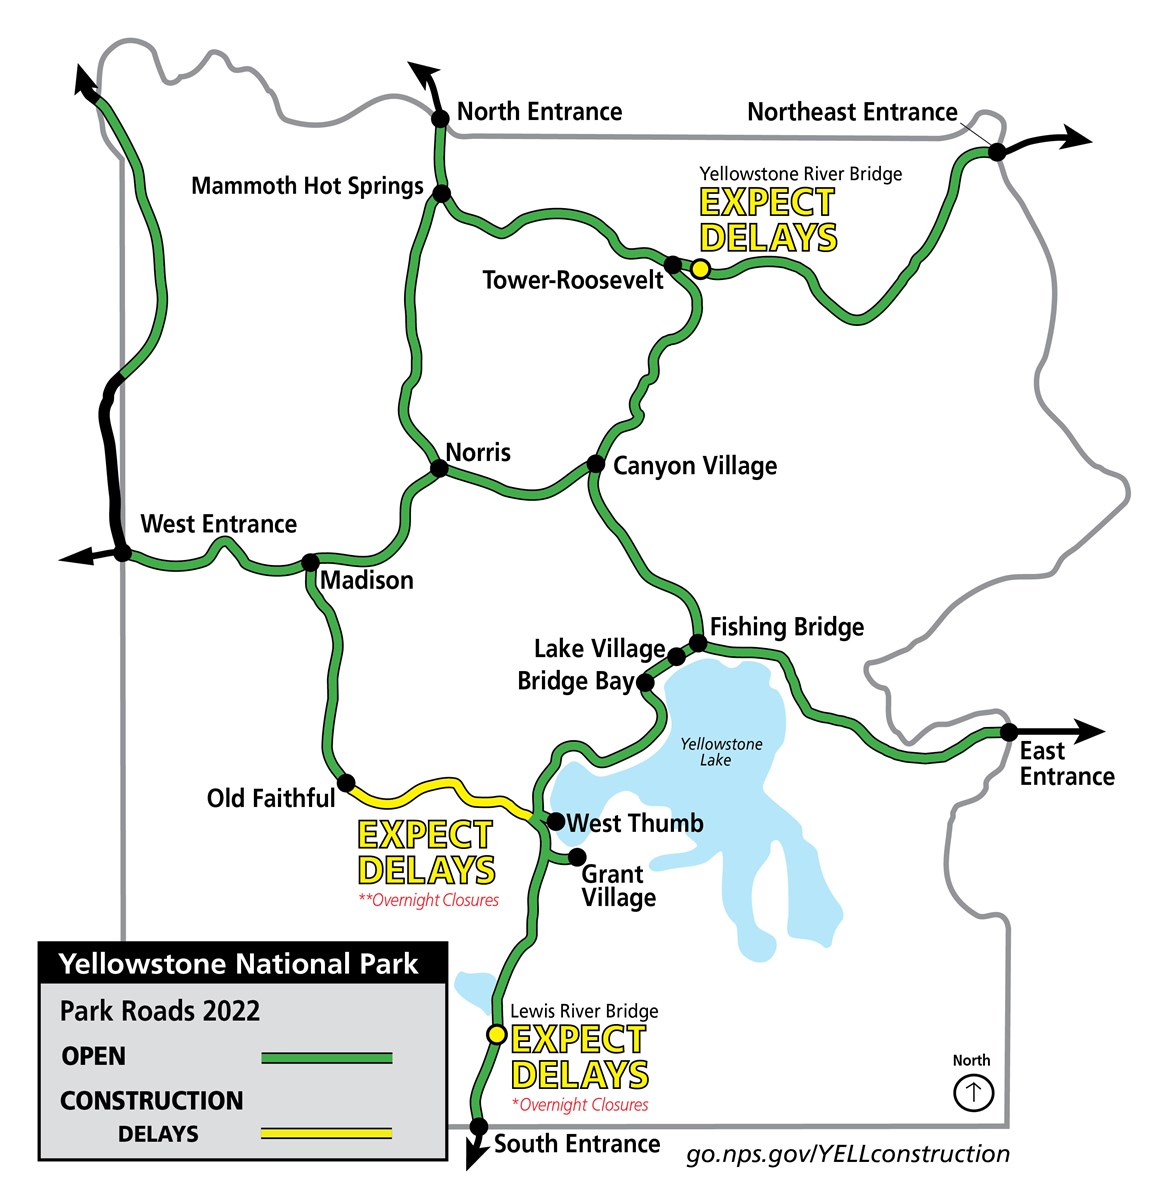 a road map of Yellowstone National Park showing areas where construction will occur in 2022